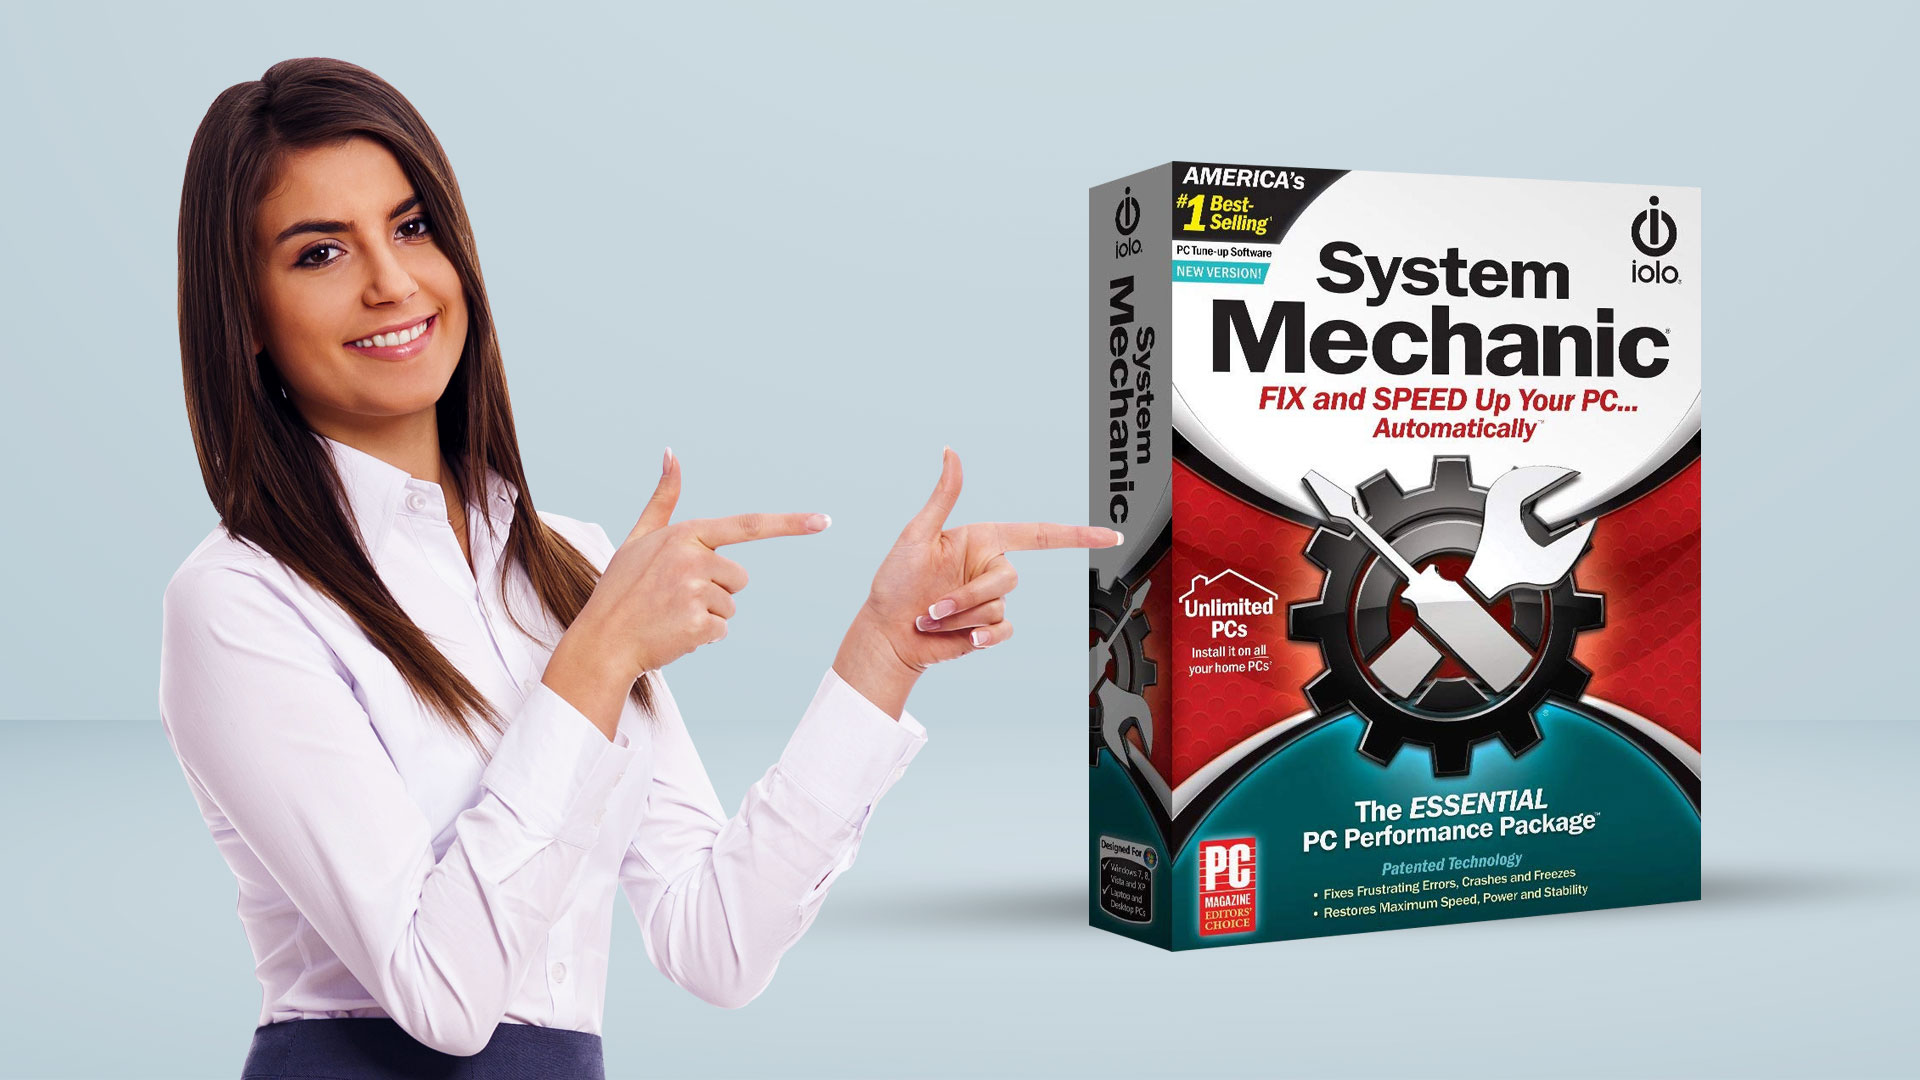 iolo System Mechanic Review